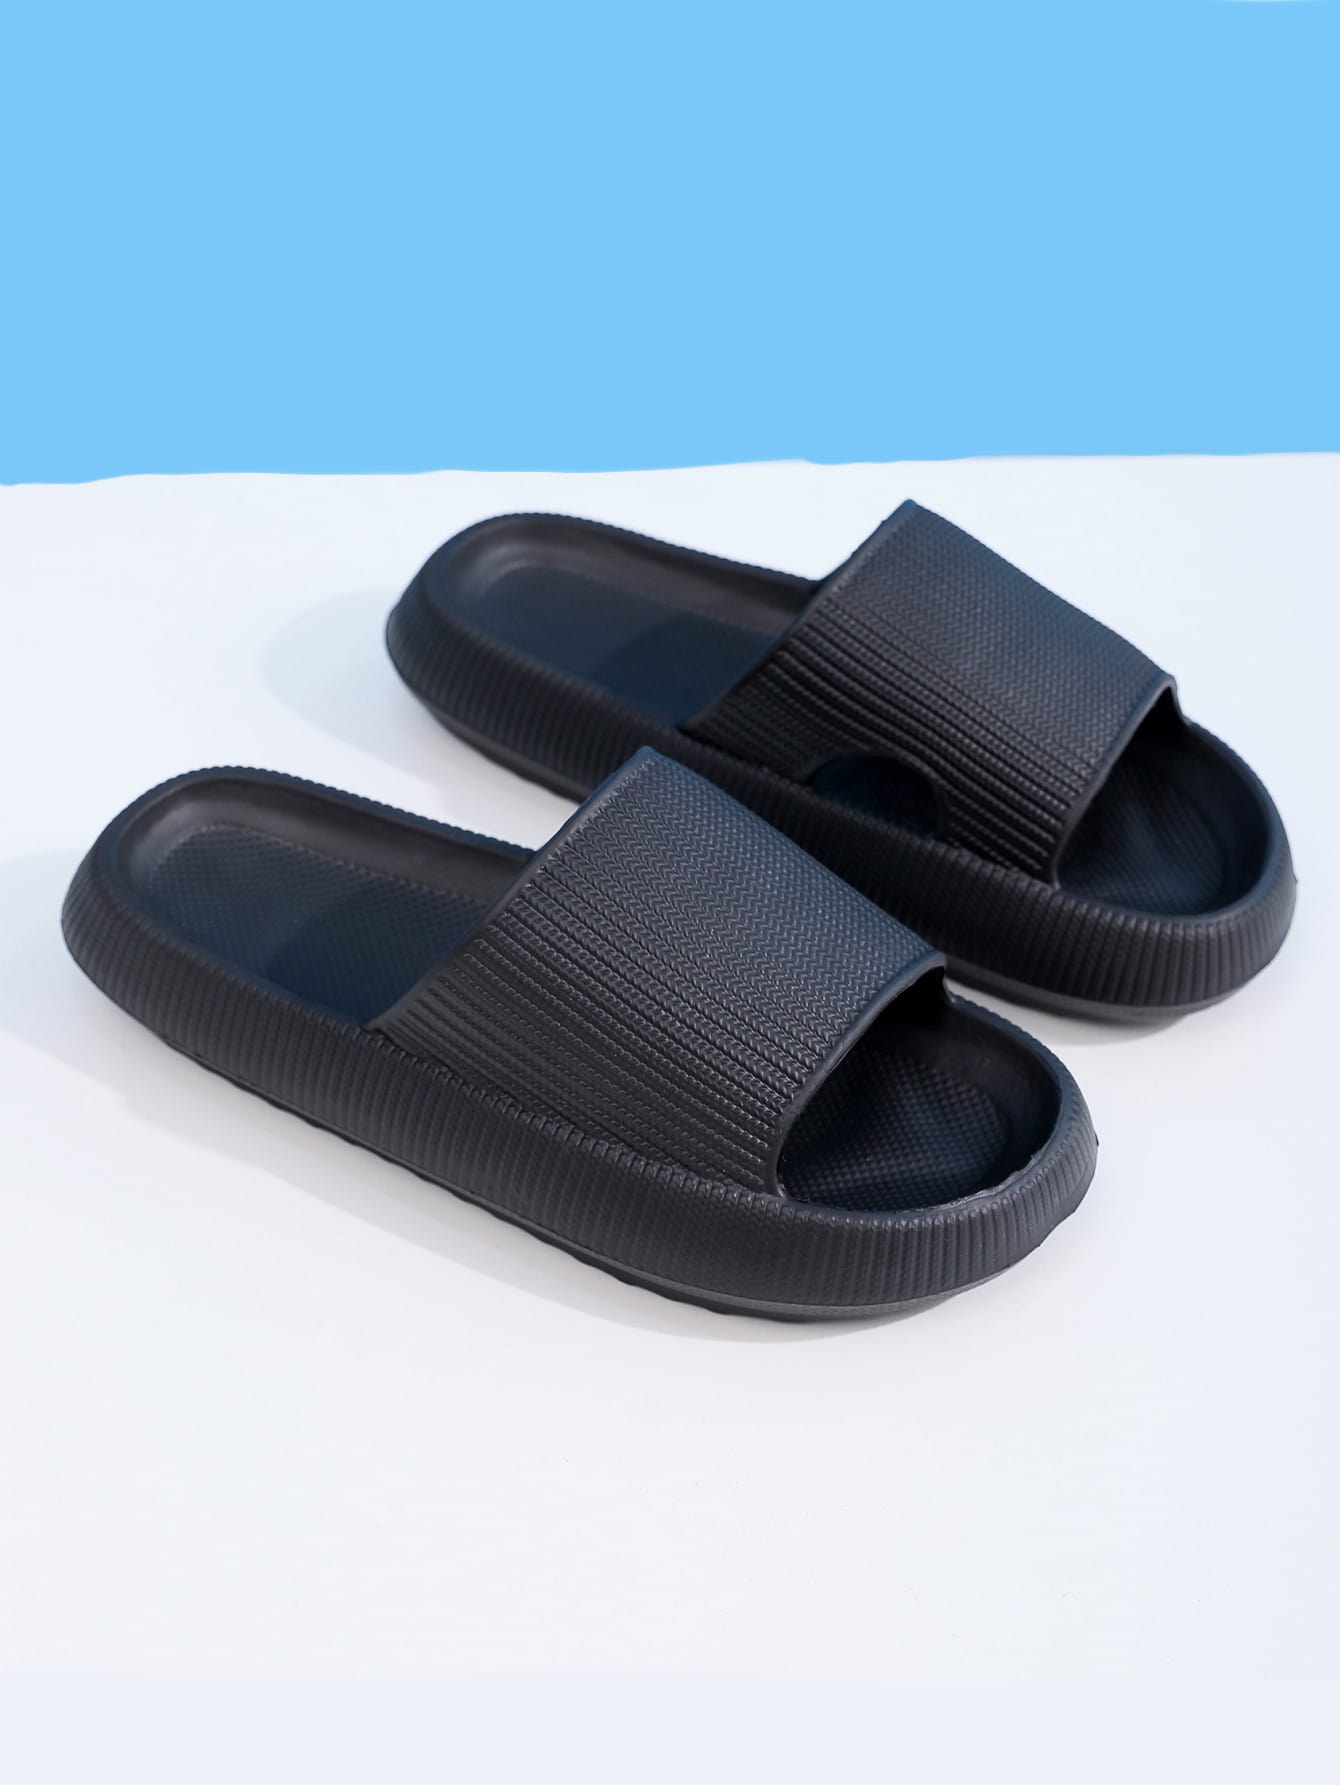 Men's INDOOR Casual Flat Slipper Sandals for Indoor Bathing & Home Use Assorted Colors 💜